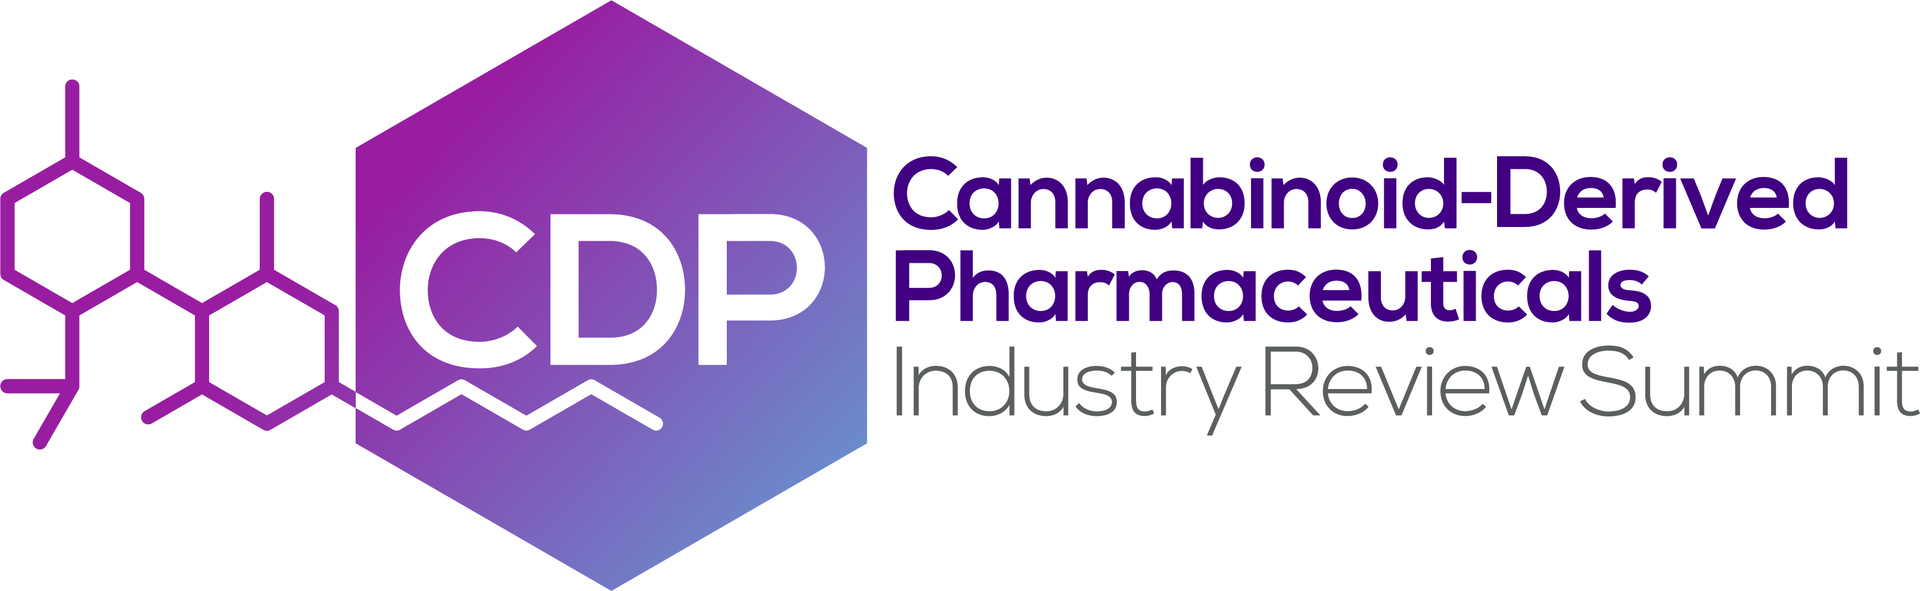 Cannabinoid Derived Pharmaceuticals Industry Review Summit, Online, United Kingdom